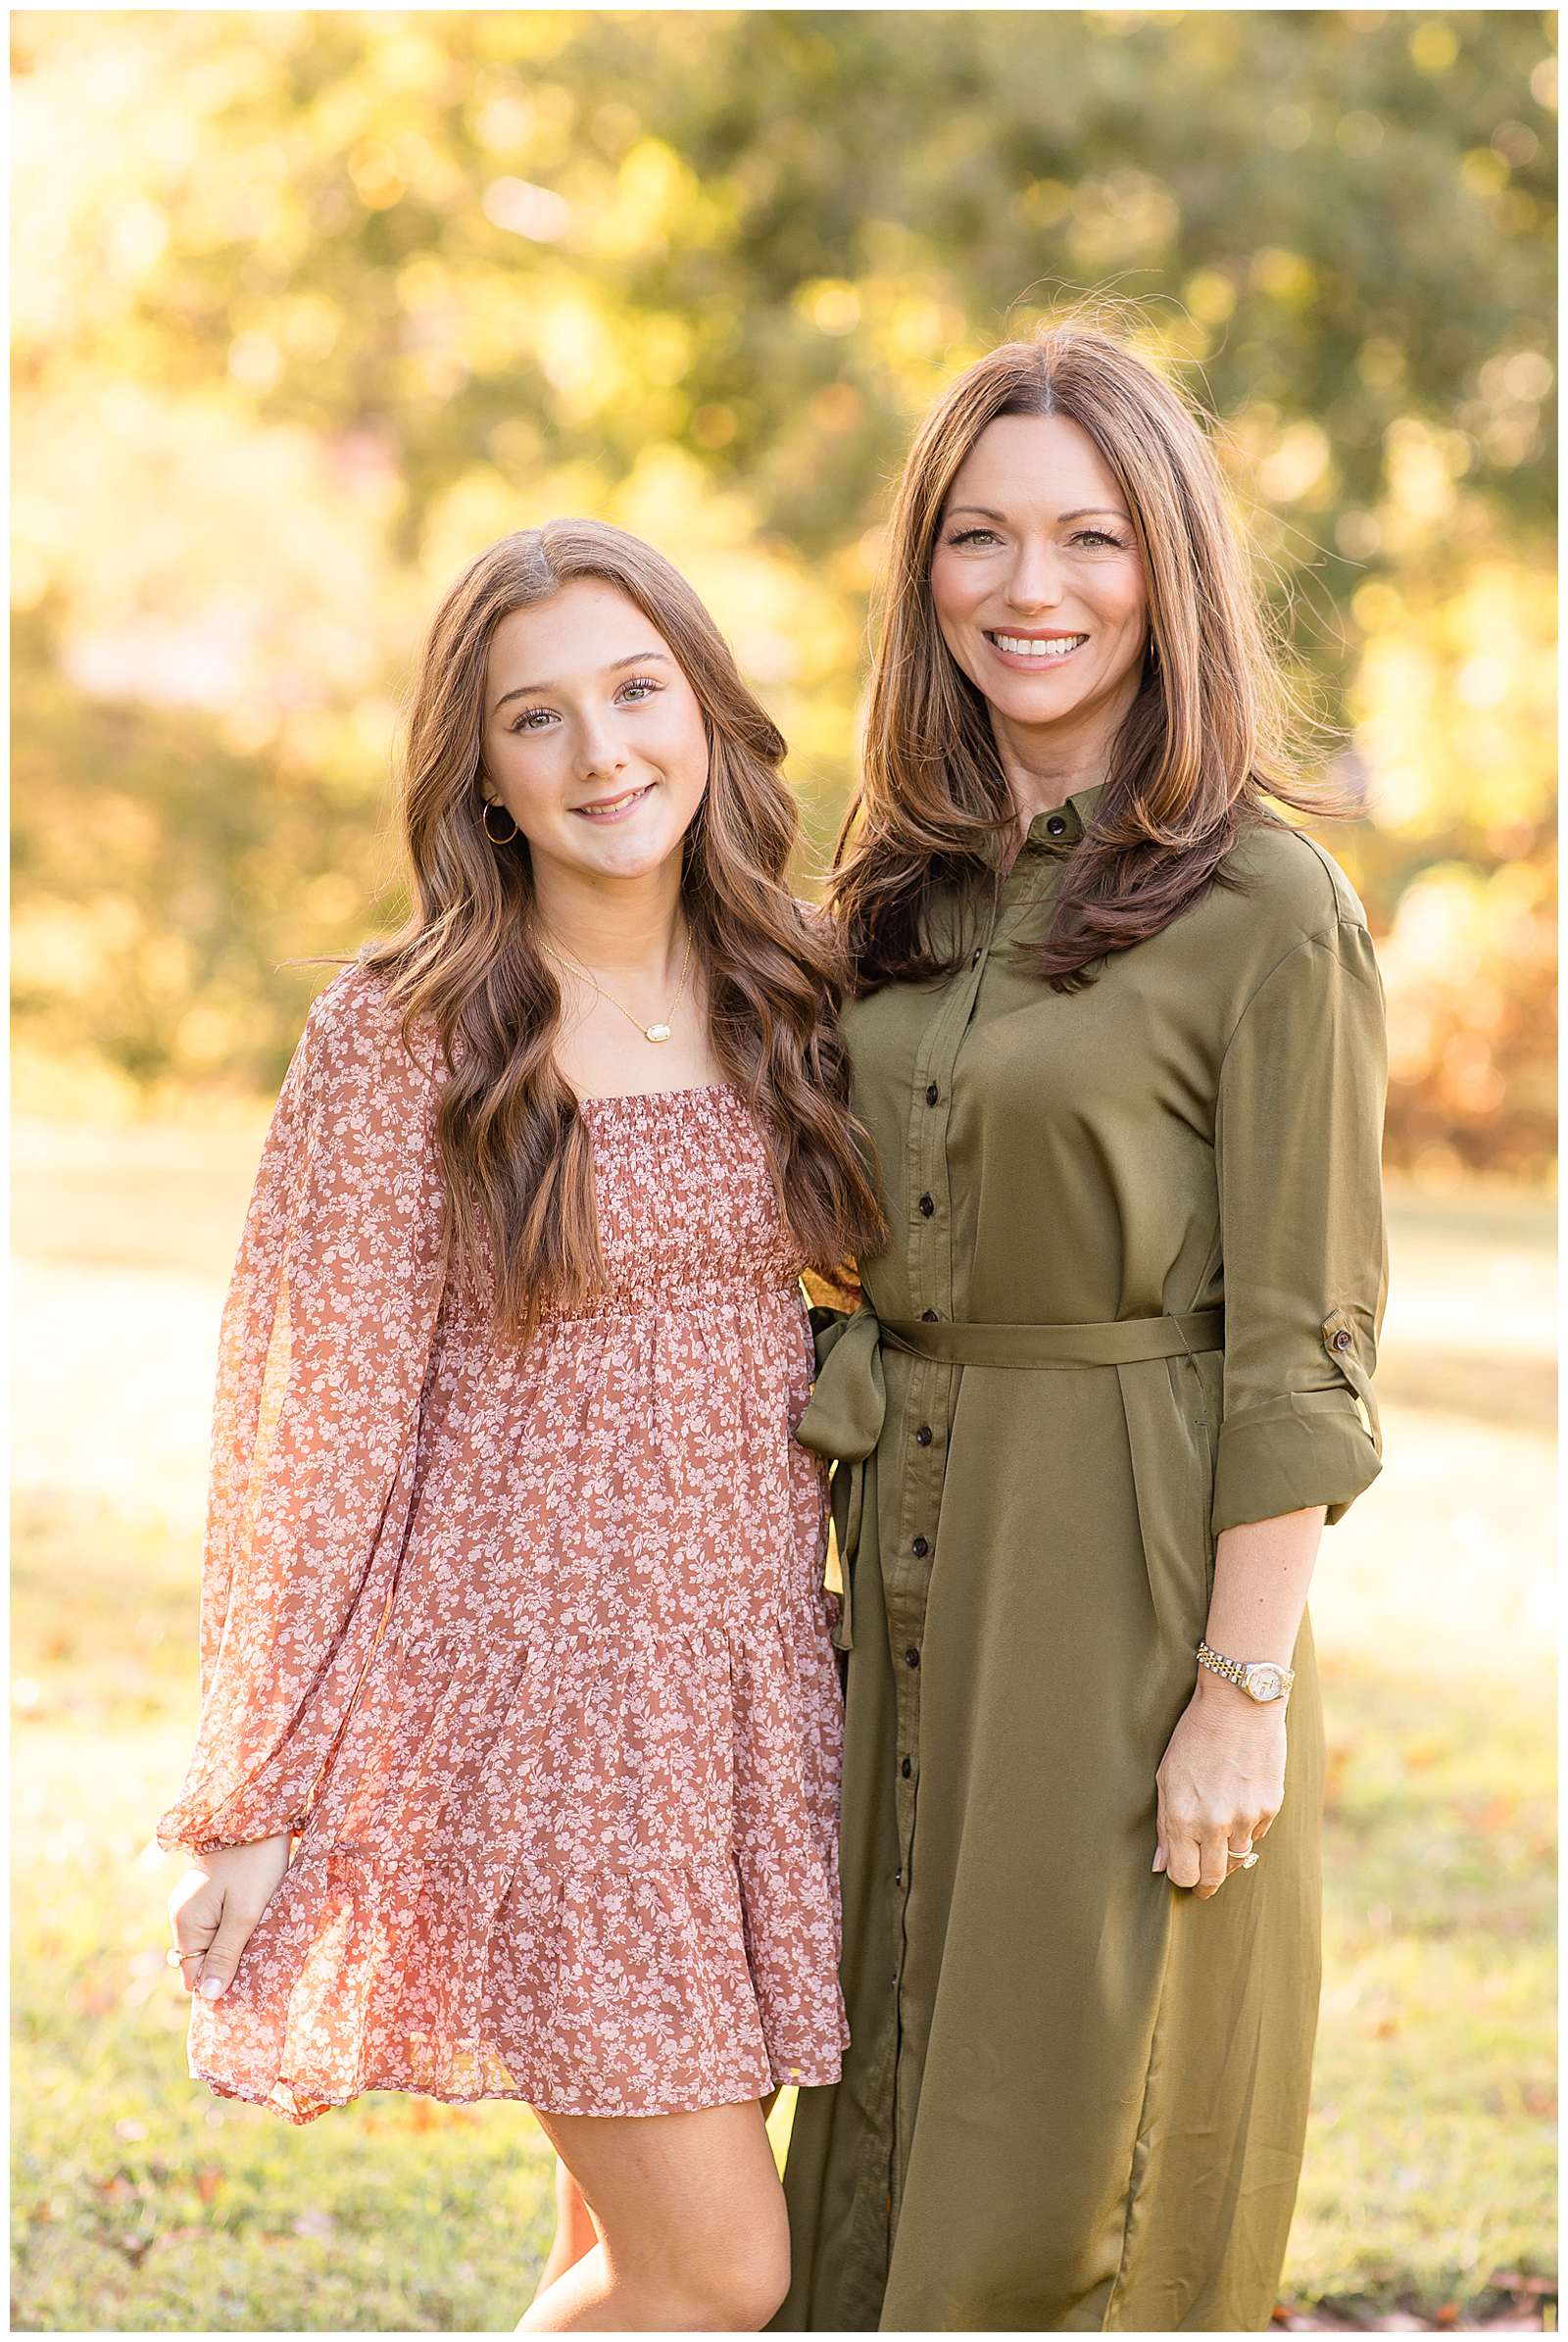 A mom who wears an olive green button down dress stands with her high school aged daughter who wears an above the knee, dusty pink, long sleeve dress with small white flower patterned dress.